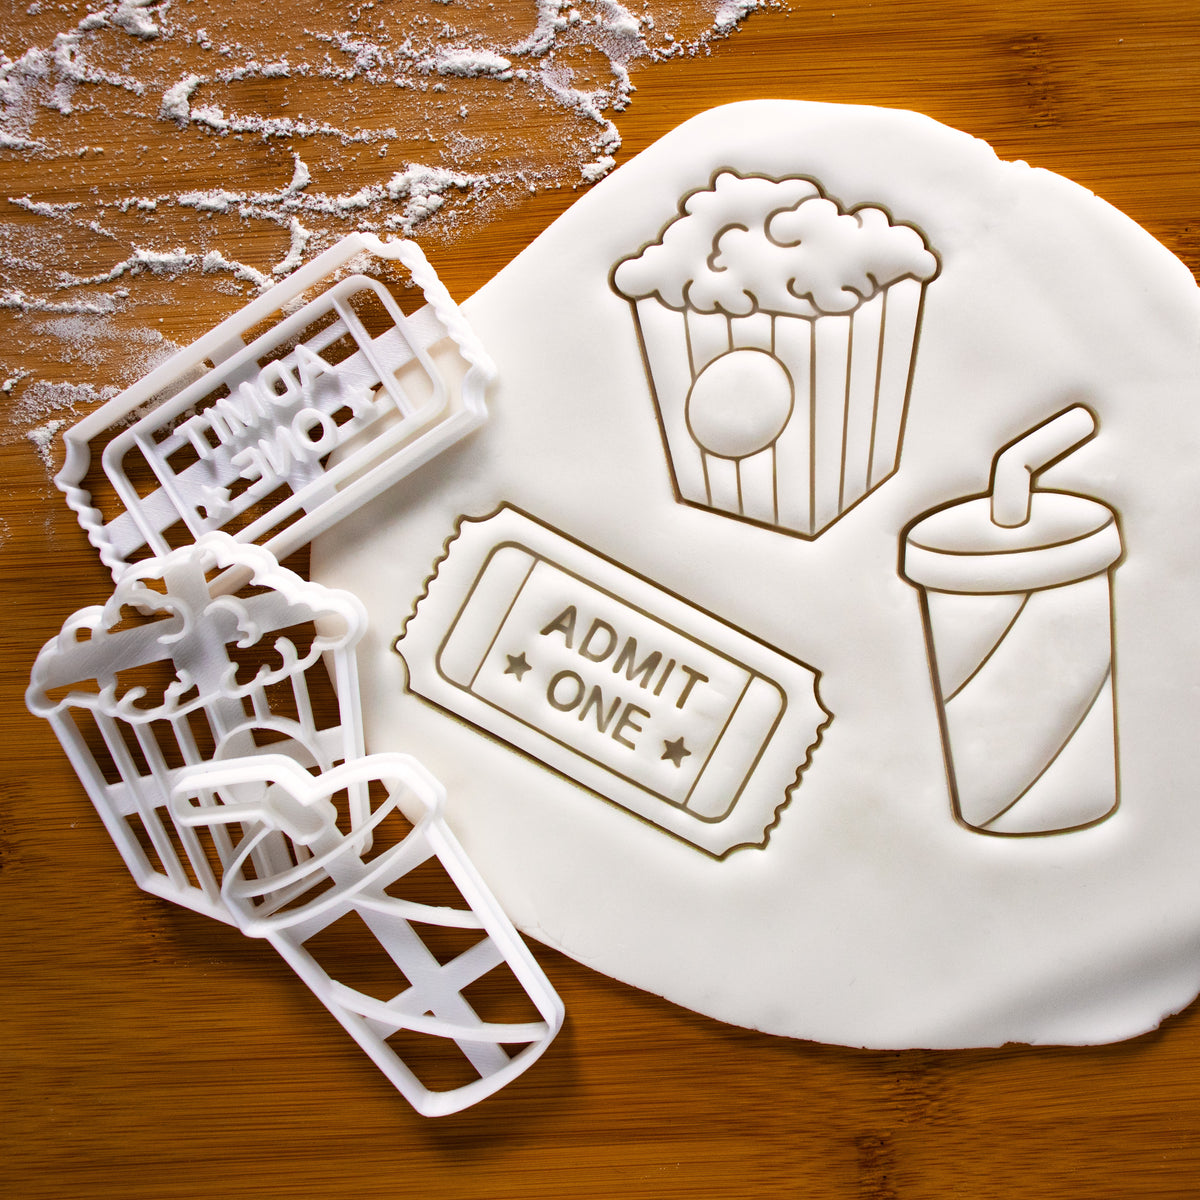 set of 3 cookie cutters, featuring popcorn, admit one ticket and soft drink cookie cutters